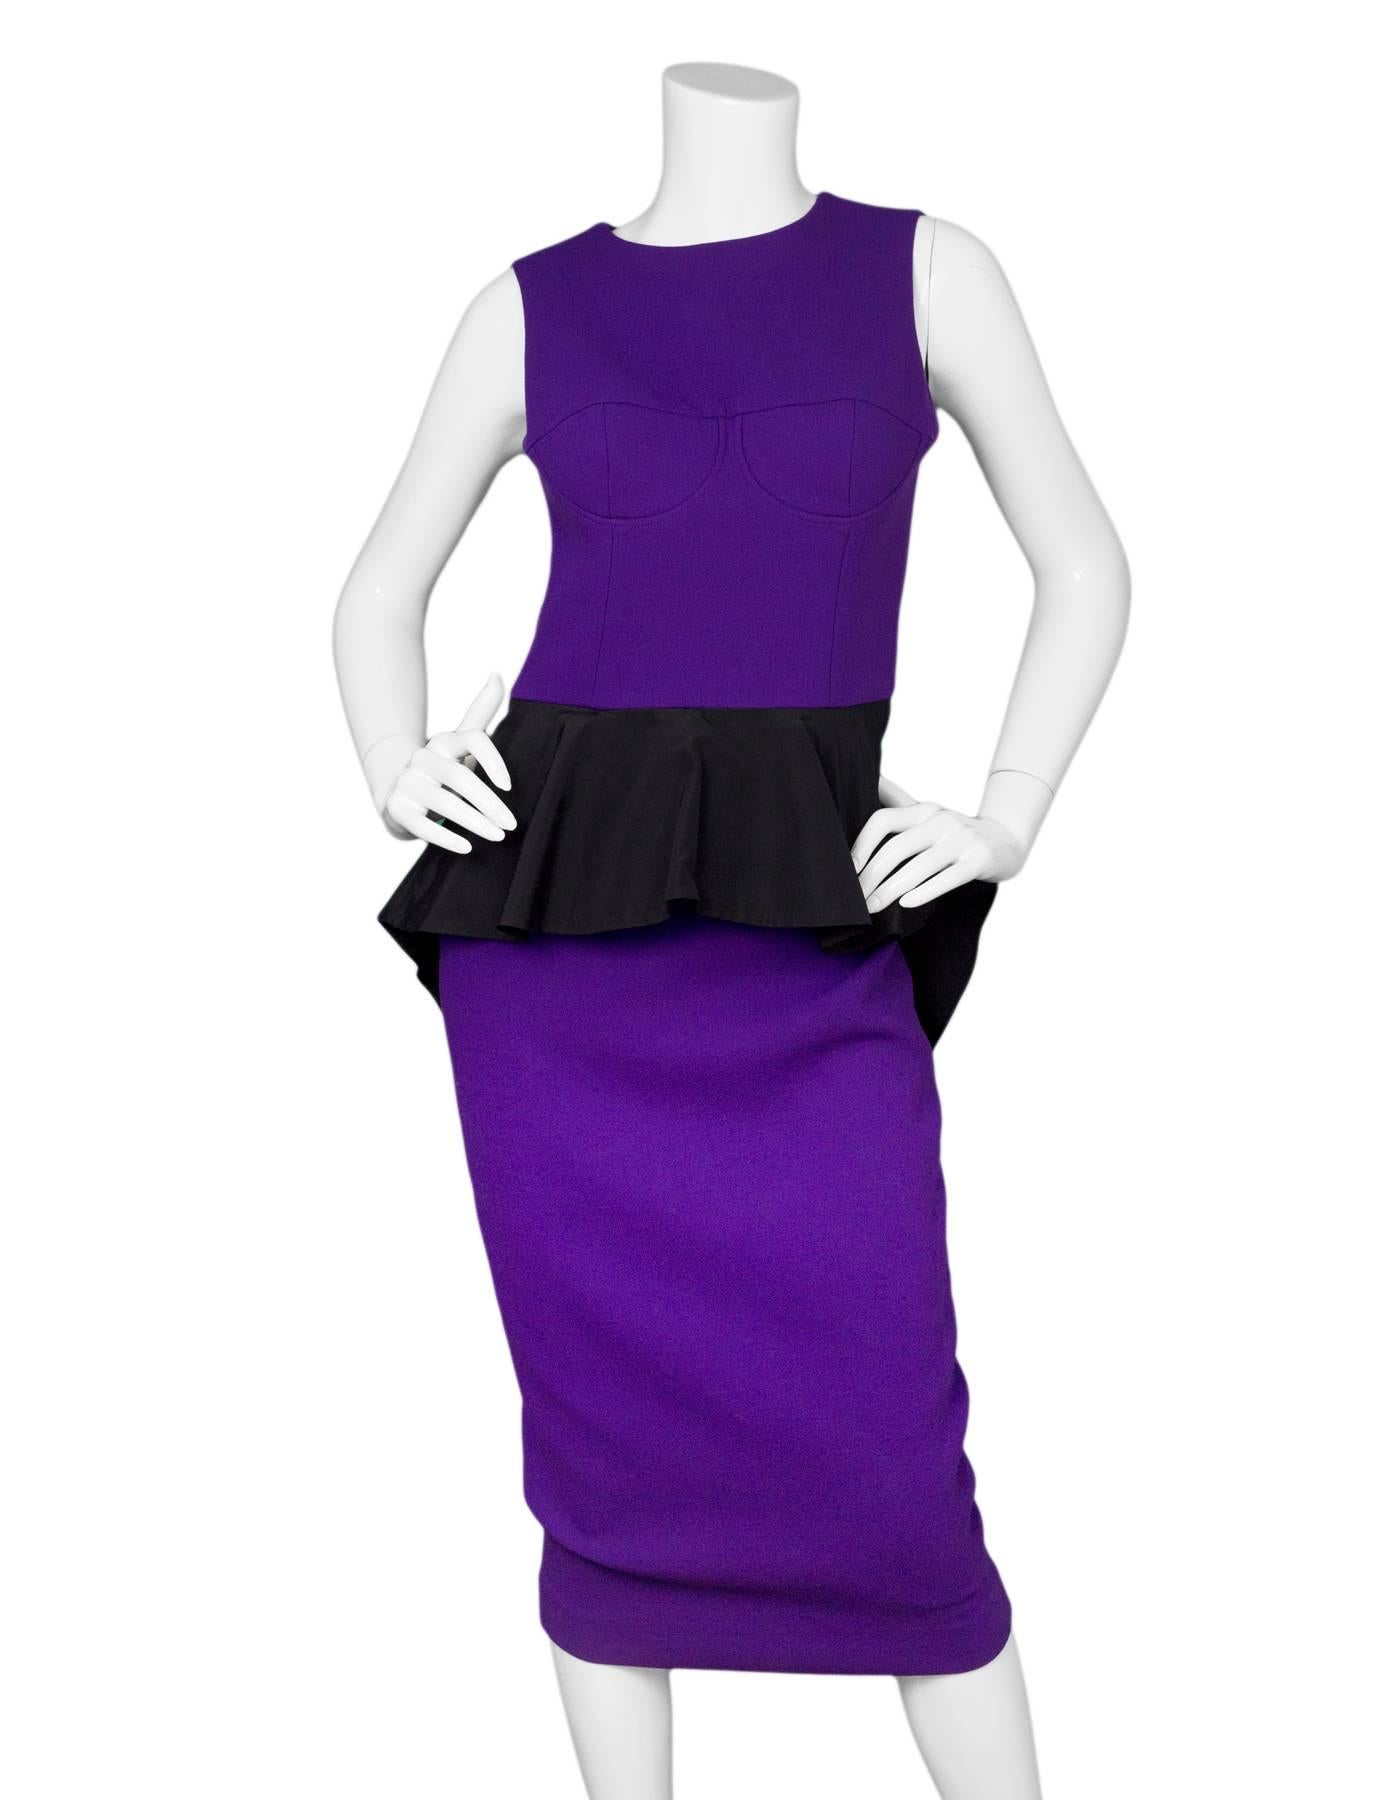 Michael Kors Purple Wool Peplum Dress Sz 2

Features open back with hi-low peplum detail

Made In: Italy
Color: Purple, black
Composition: 99% wool, 1% spandex
Lining: Purple textile
Closure/Opening: Back zip closure
Overall Condition: Excellent